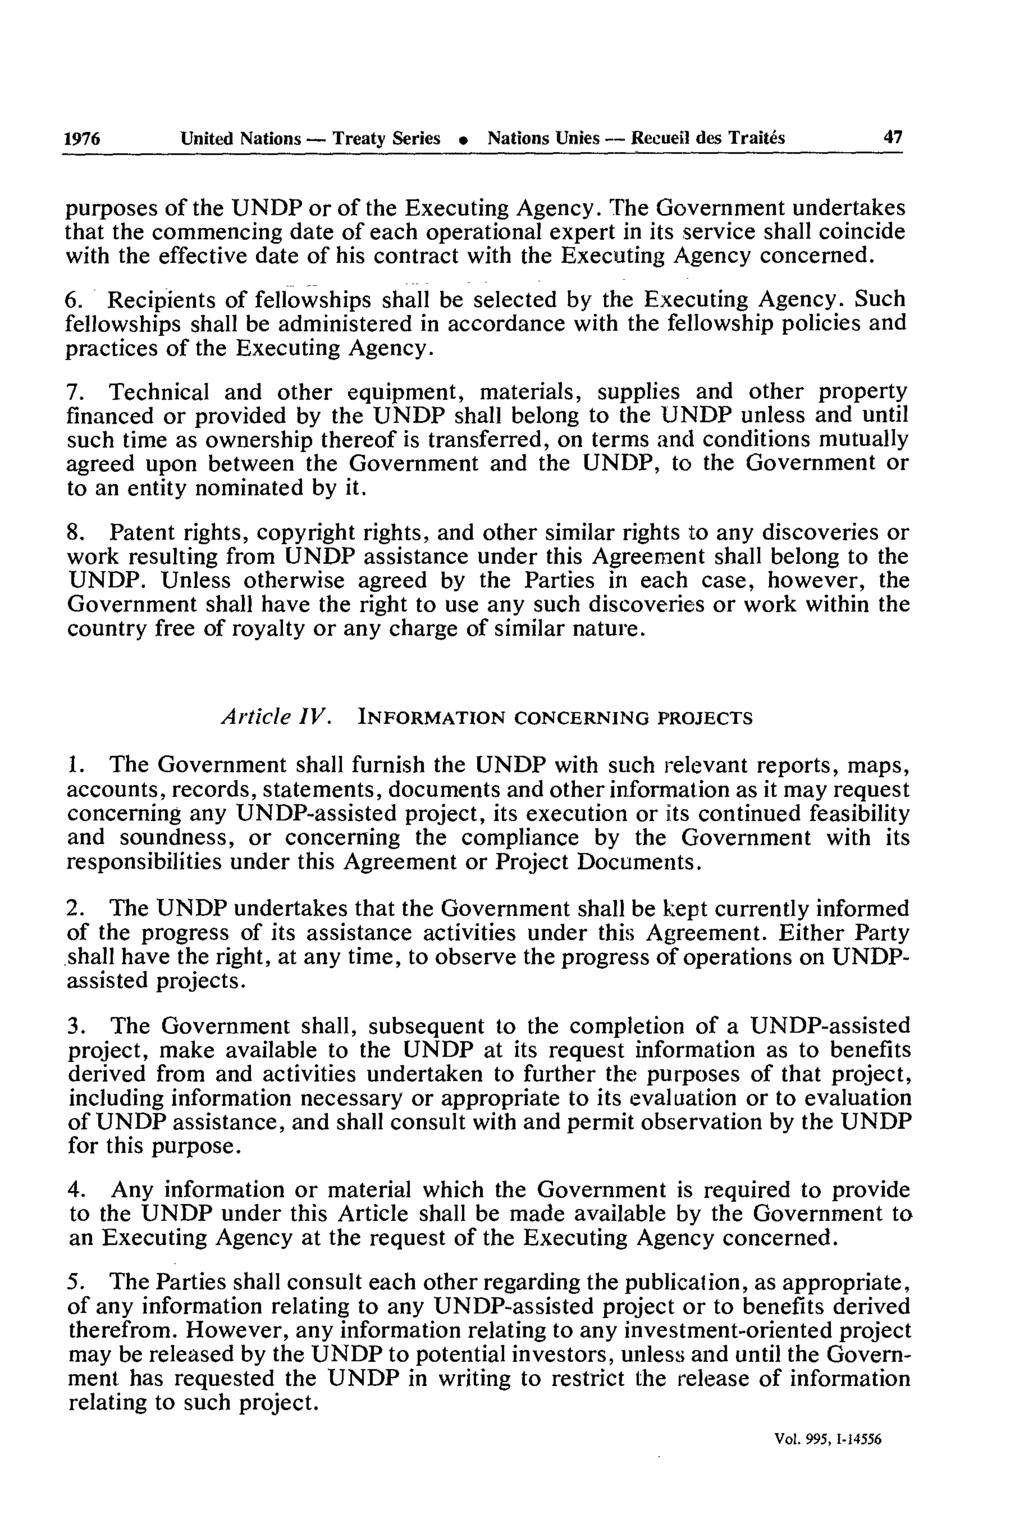 1976 United Nations Treaty Series Nations Unies Recueil des Traités 47 purposes of the UNDP or of the Executing Agency.